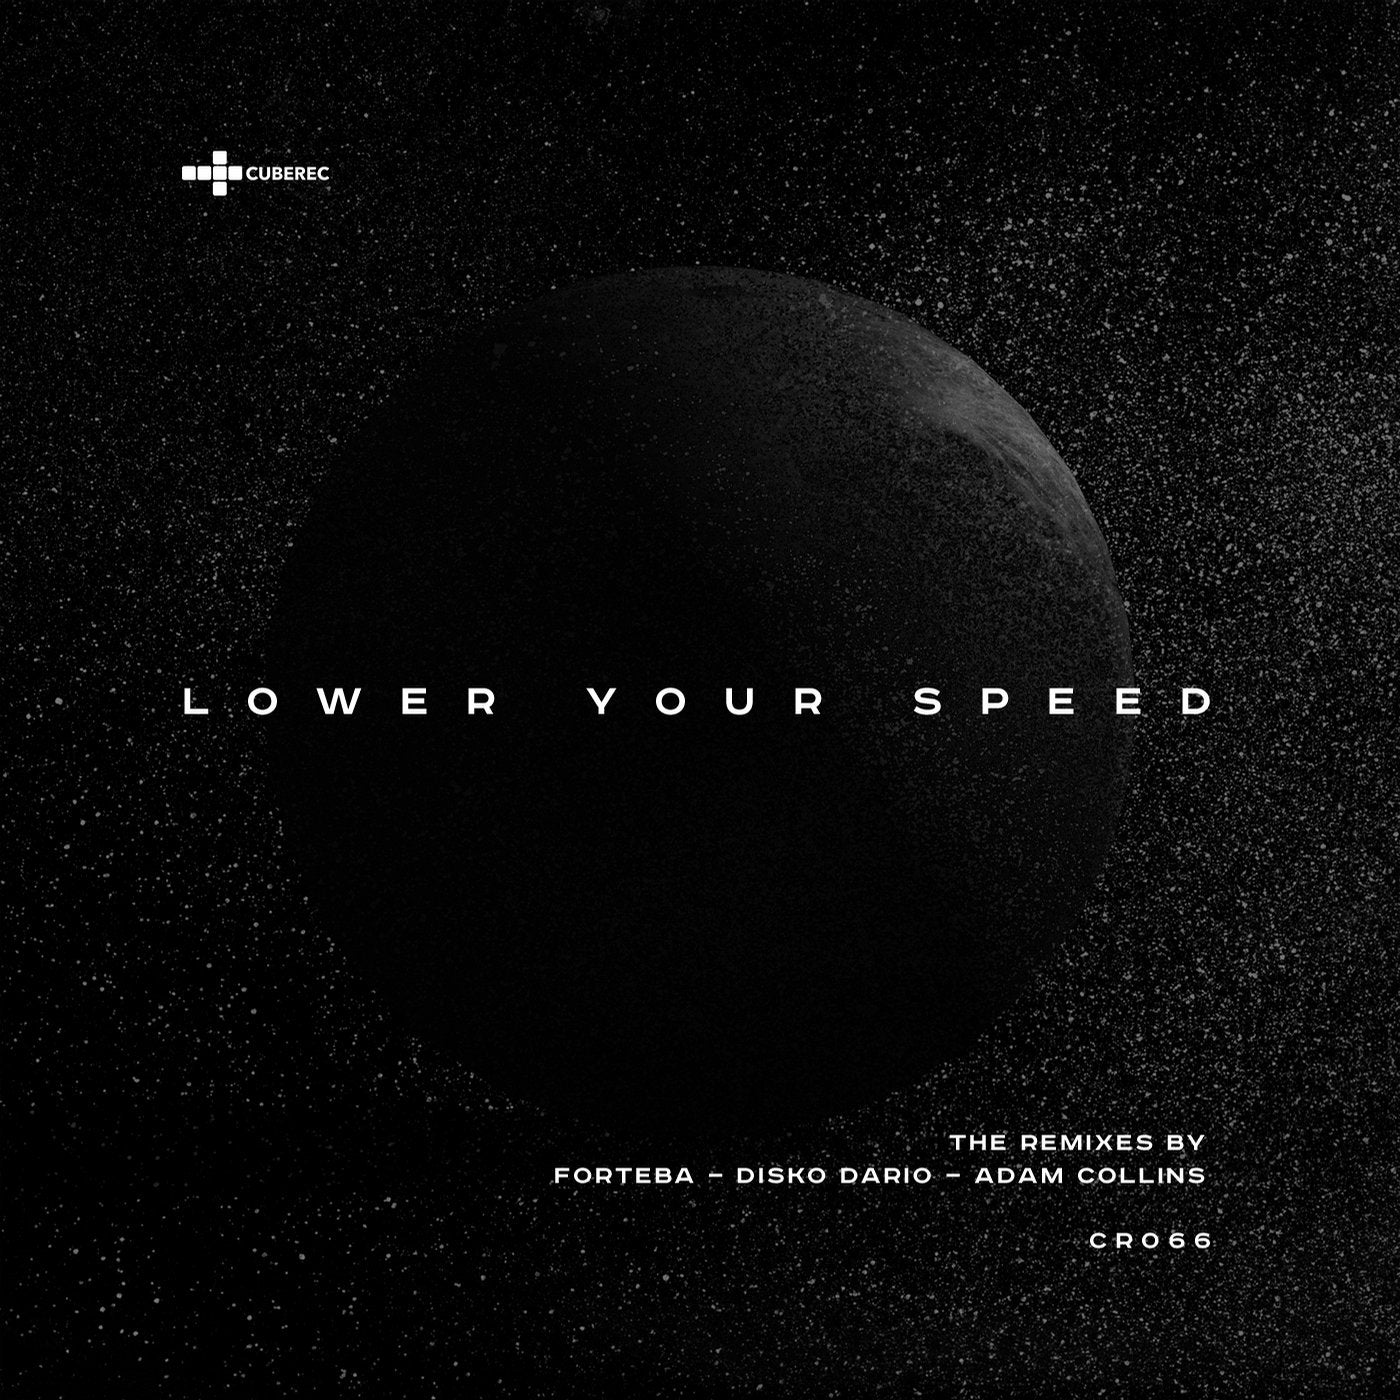 Lower Your Speed - the Remixes